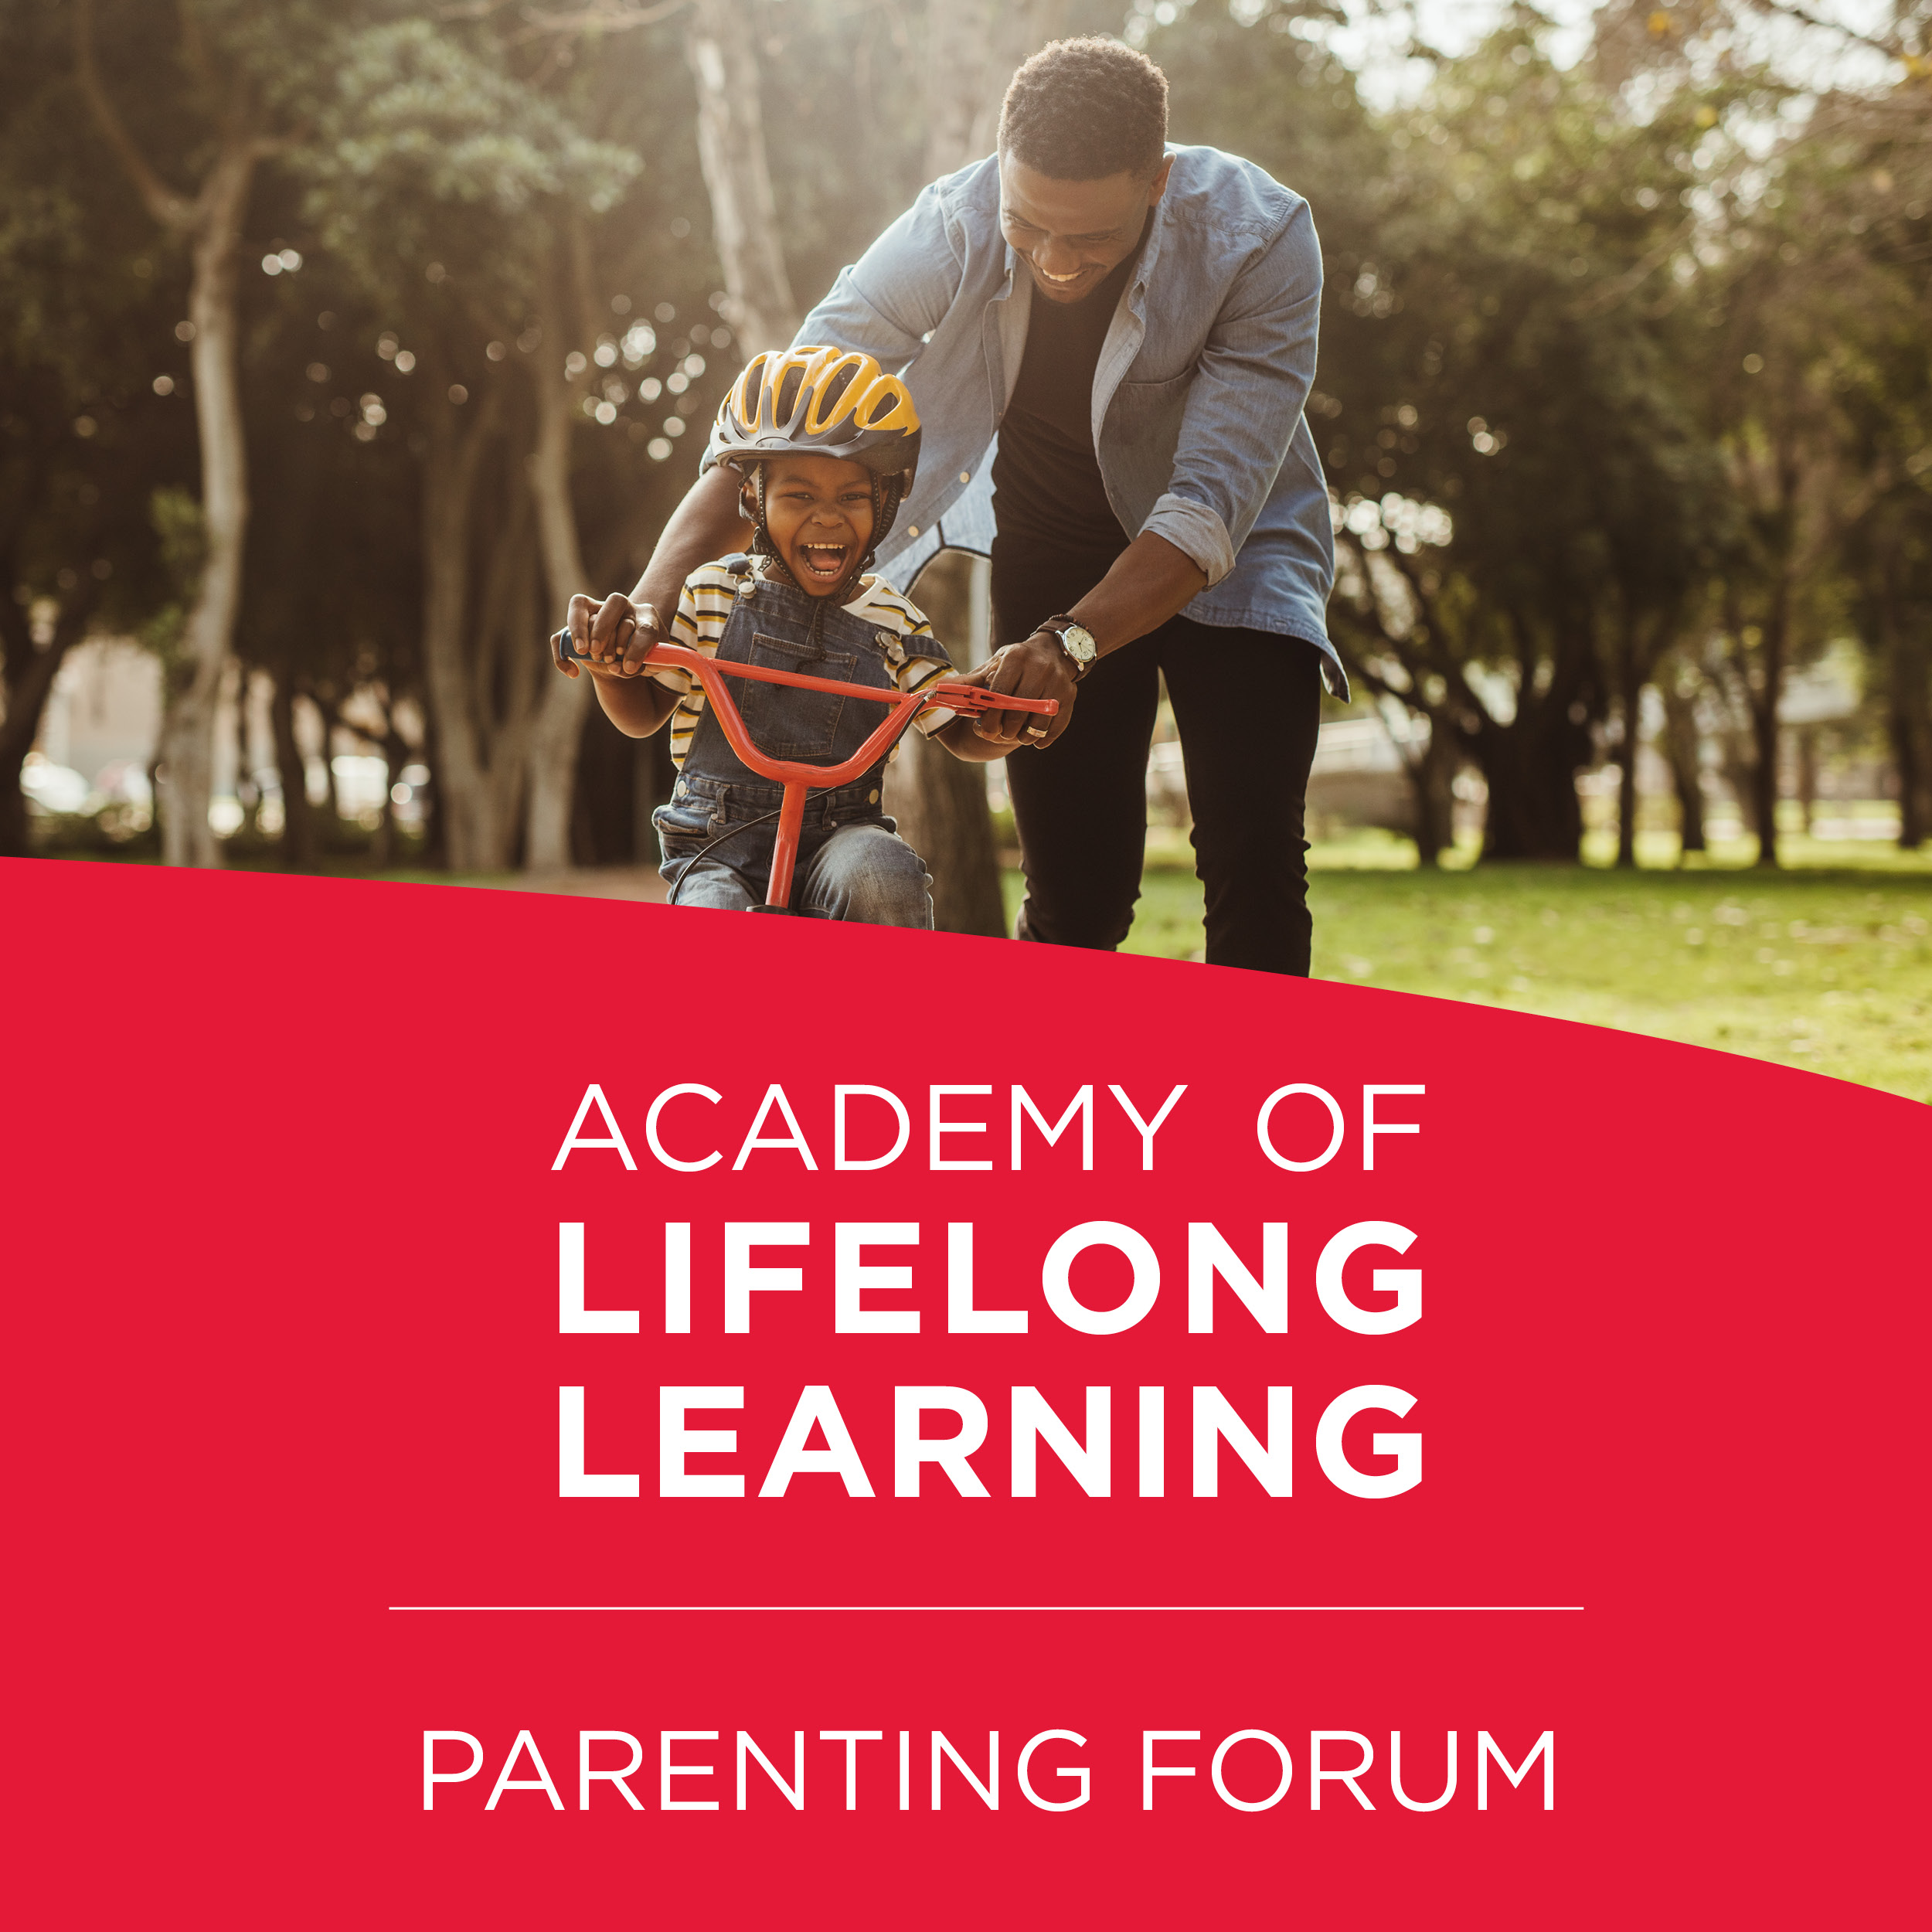 Man helping steer child on bike with words Academy of Lifelong Learning Parenting Forum